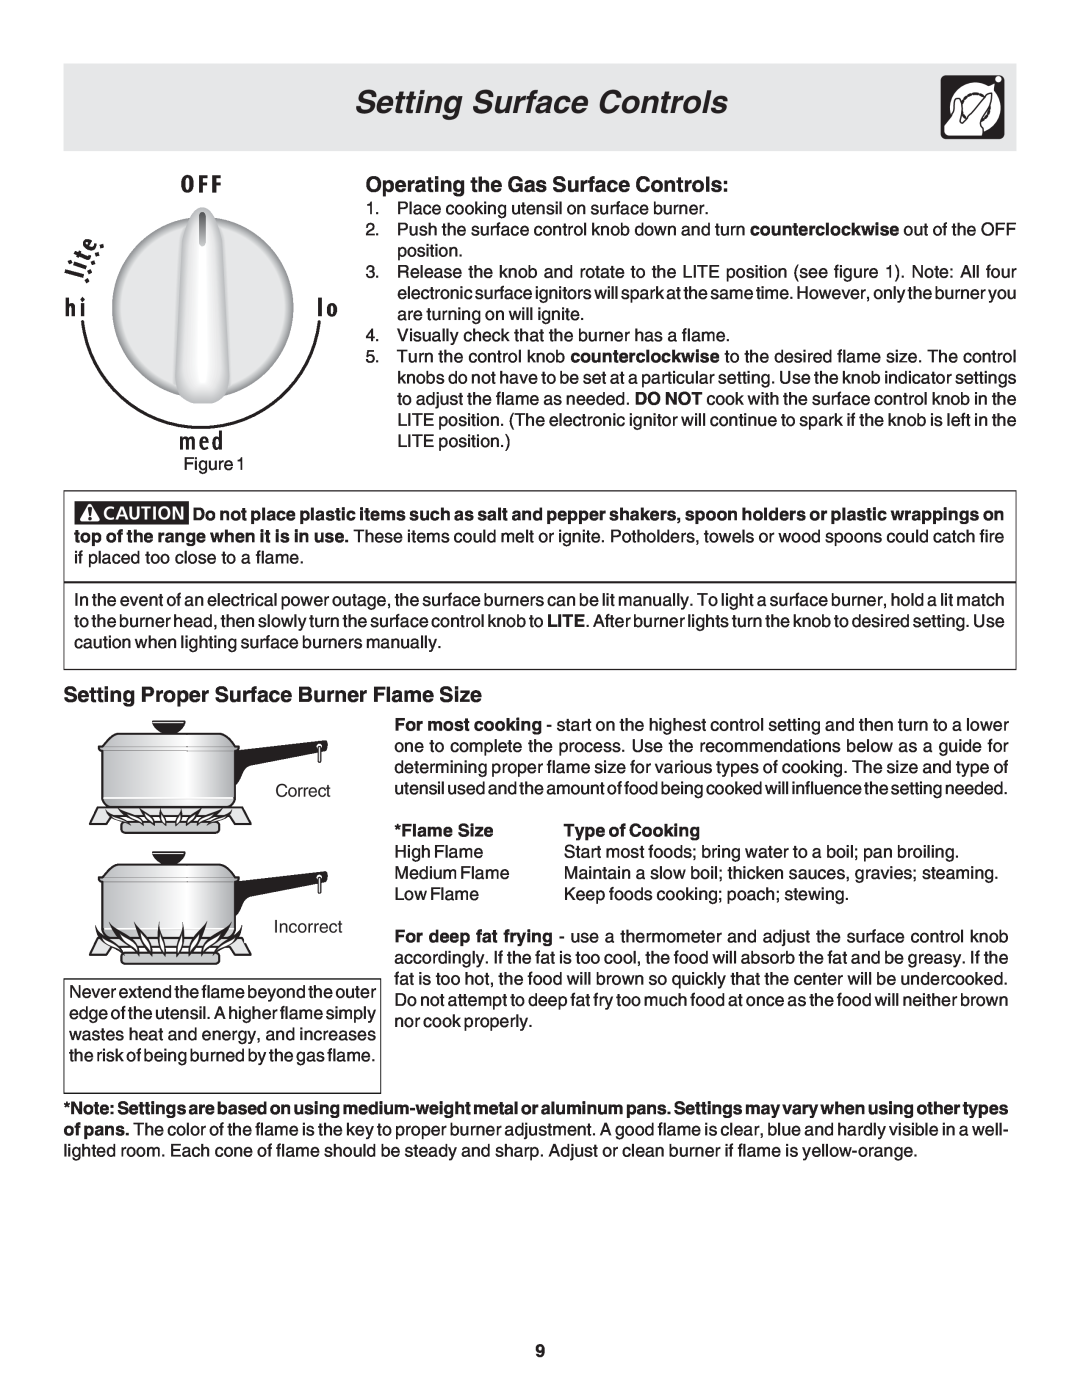 Frigidaire 318203873 manual Setting Surface Controls, Operating the Gas Surface Controls, Flame Size, Type of Cooking 